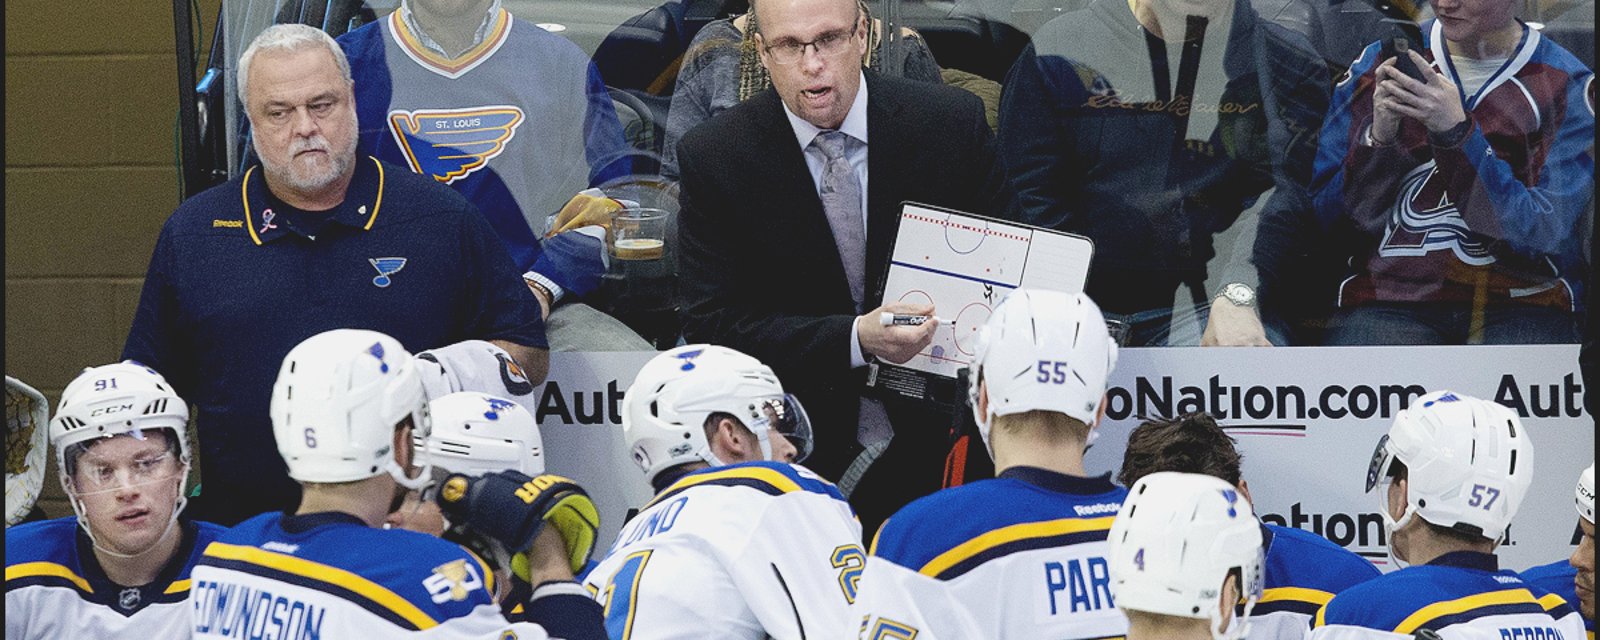 St. Louis Blues head coach Mike Yeo congratulates the enemy for showing, “NO RESPECT.”